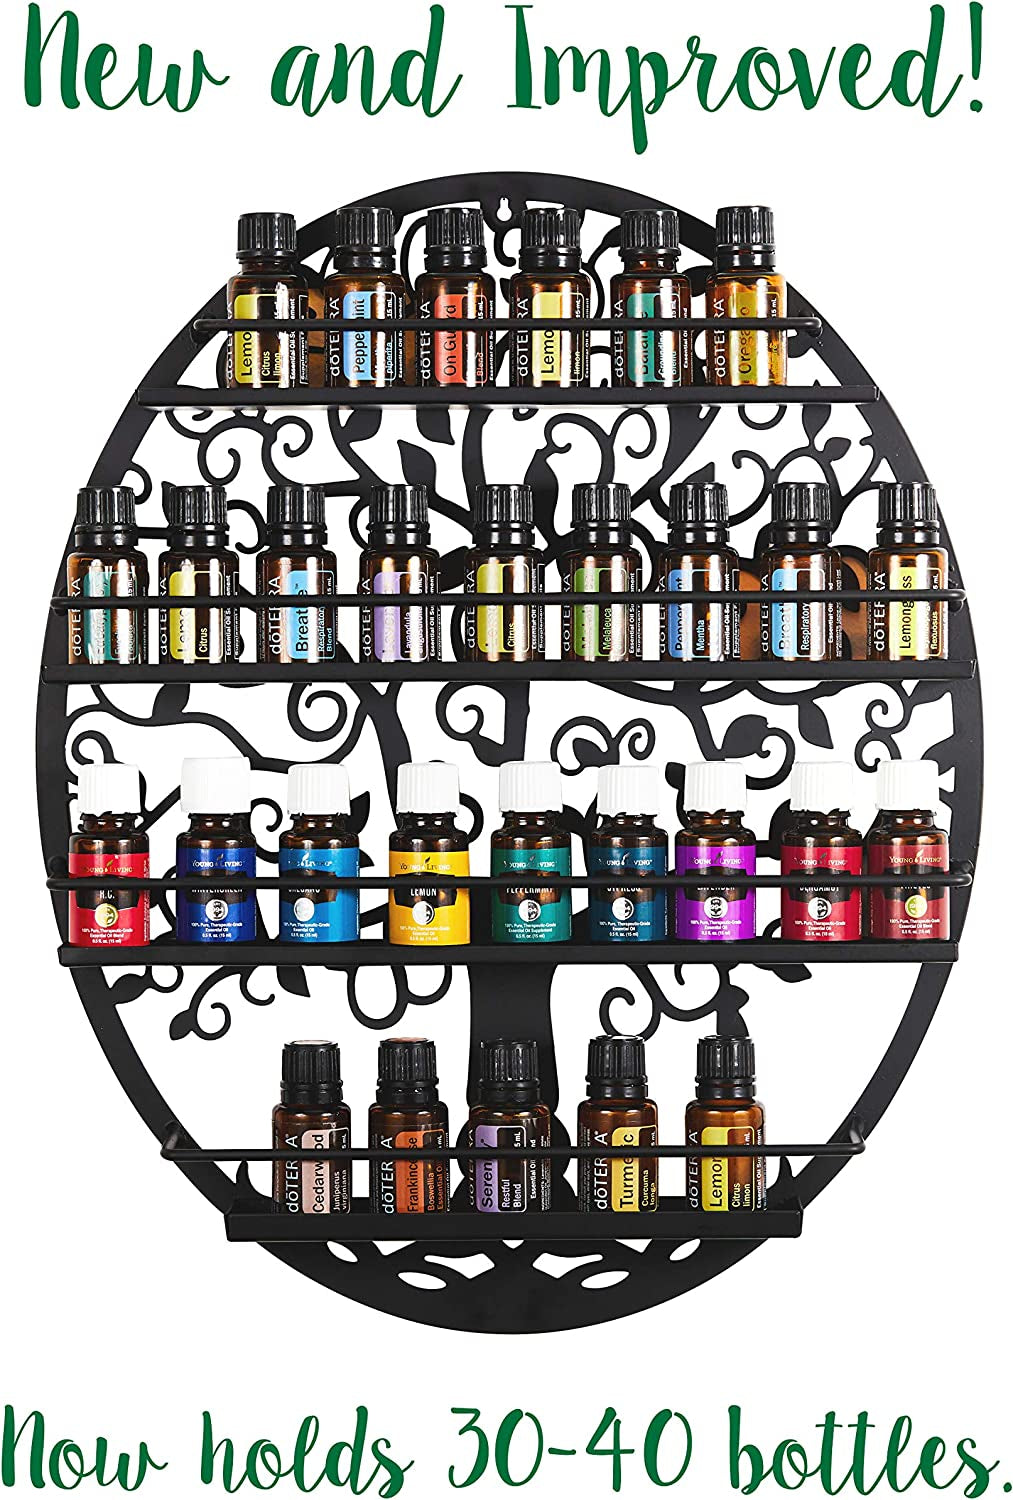 Essential Oils & Nail Polish Organizer - Display Holder Storage Shelf from Oval Black with Tree Silhouette - Wall Mounted round Rack Oil Bottle Storage (Black)